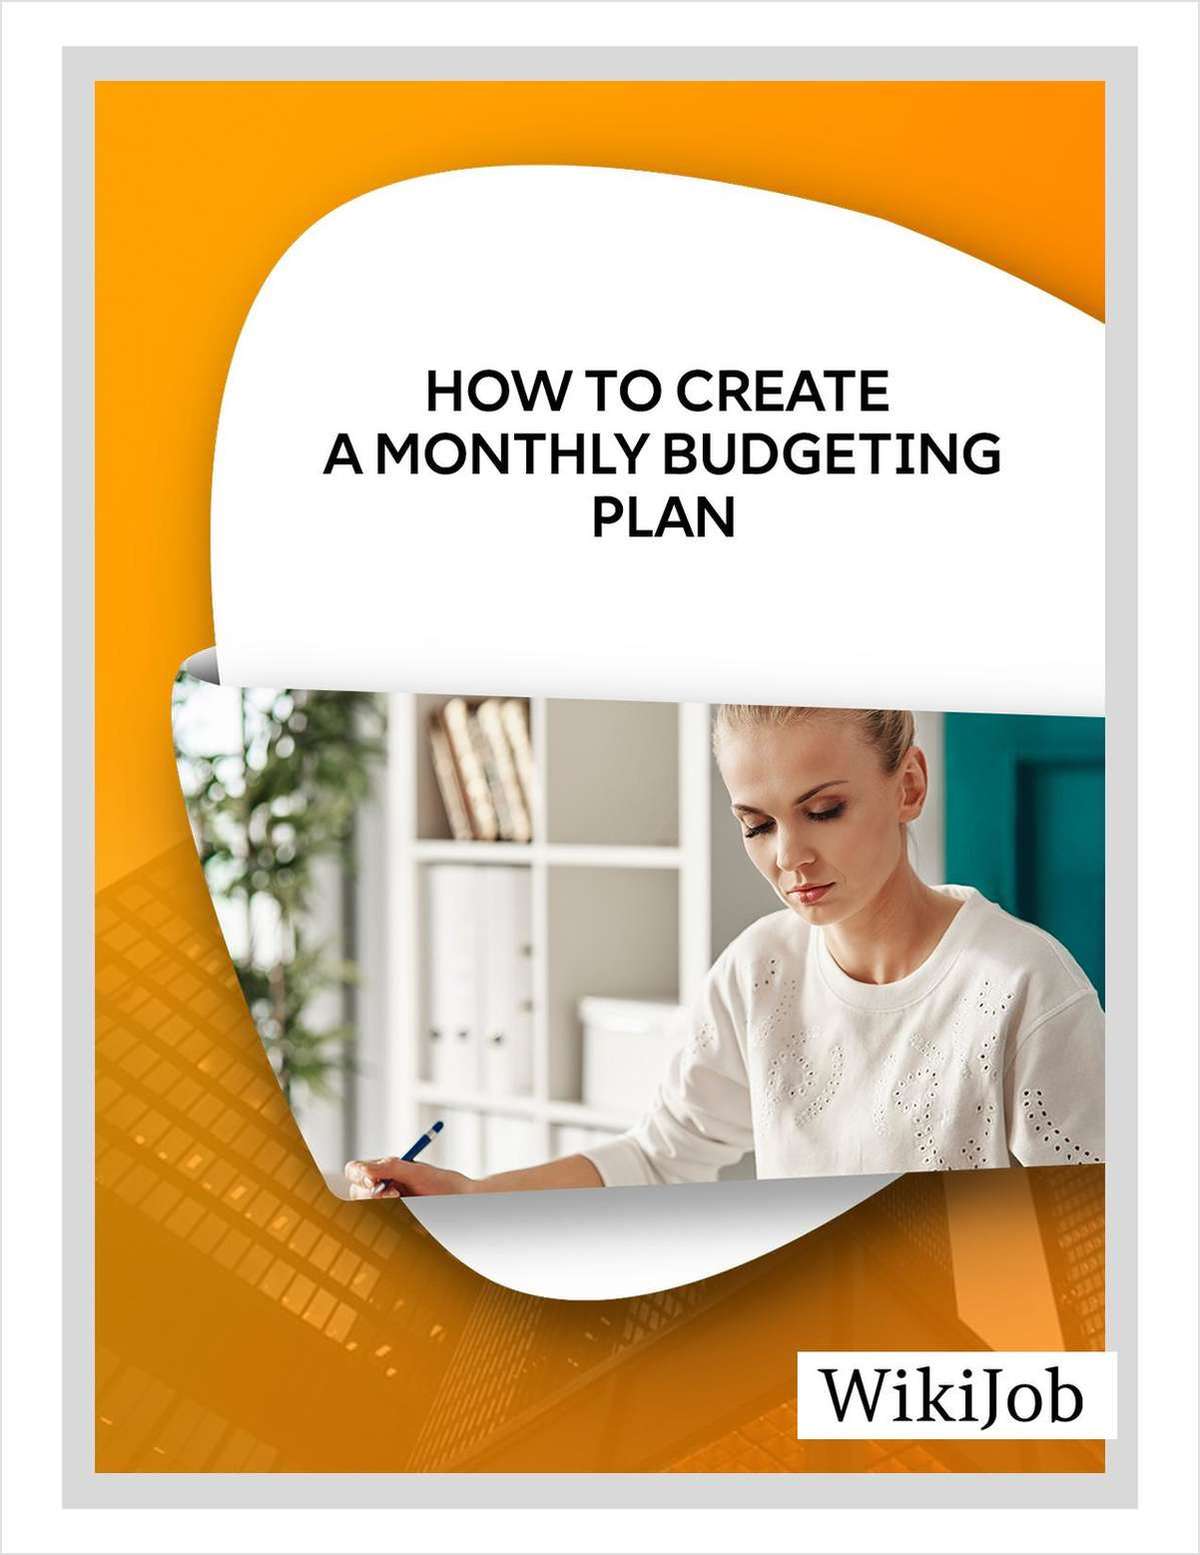 How to Create a Monthly Budgeting Plan